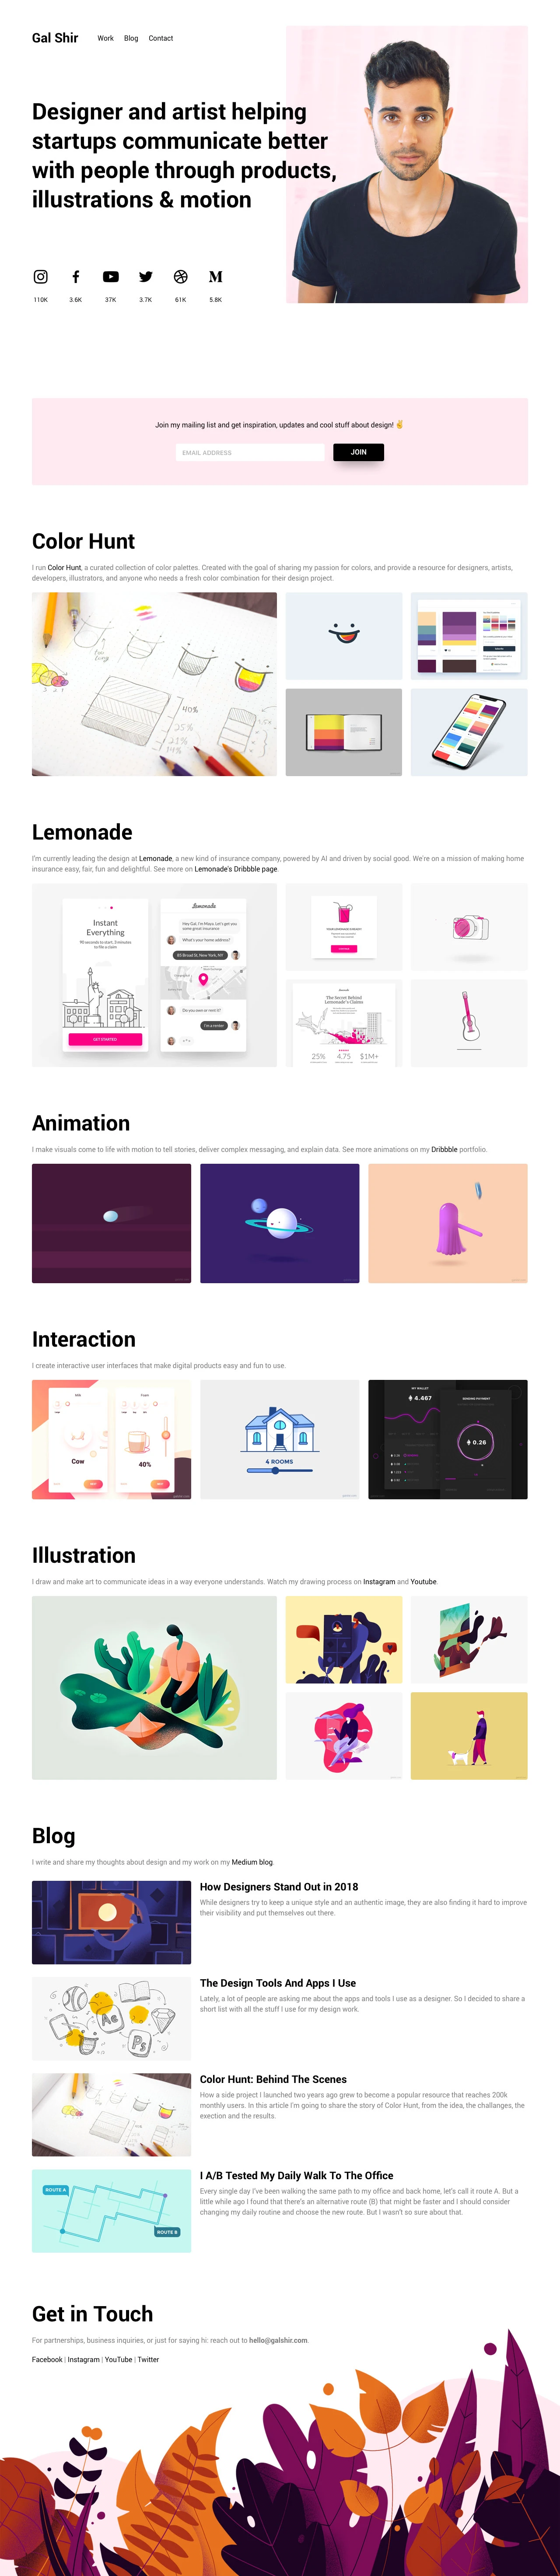 Gal Shir Landing Page Example: Designer and artist helping startups communicate better with people through products, illustrations & motion